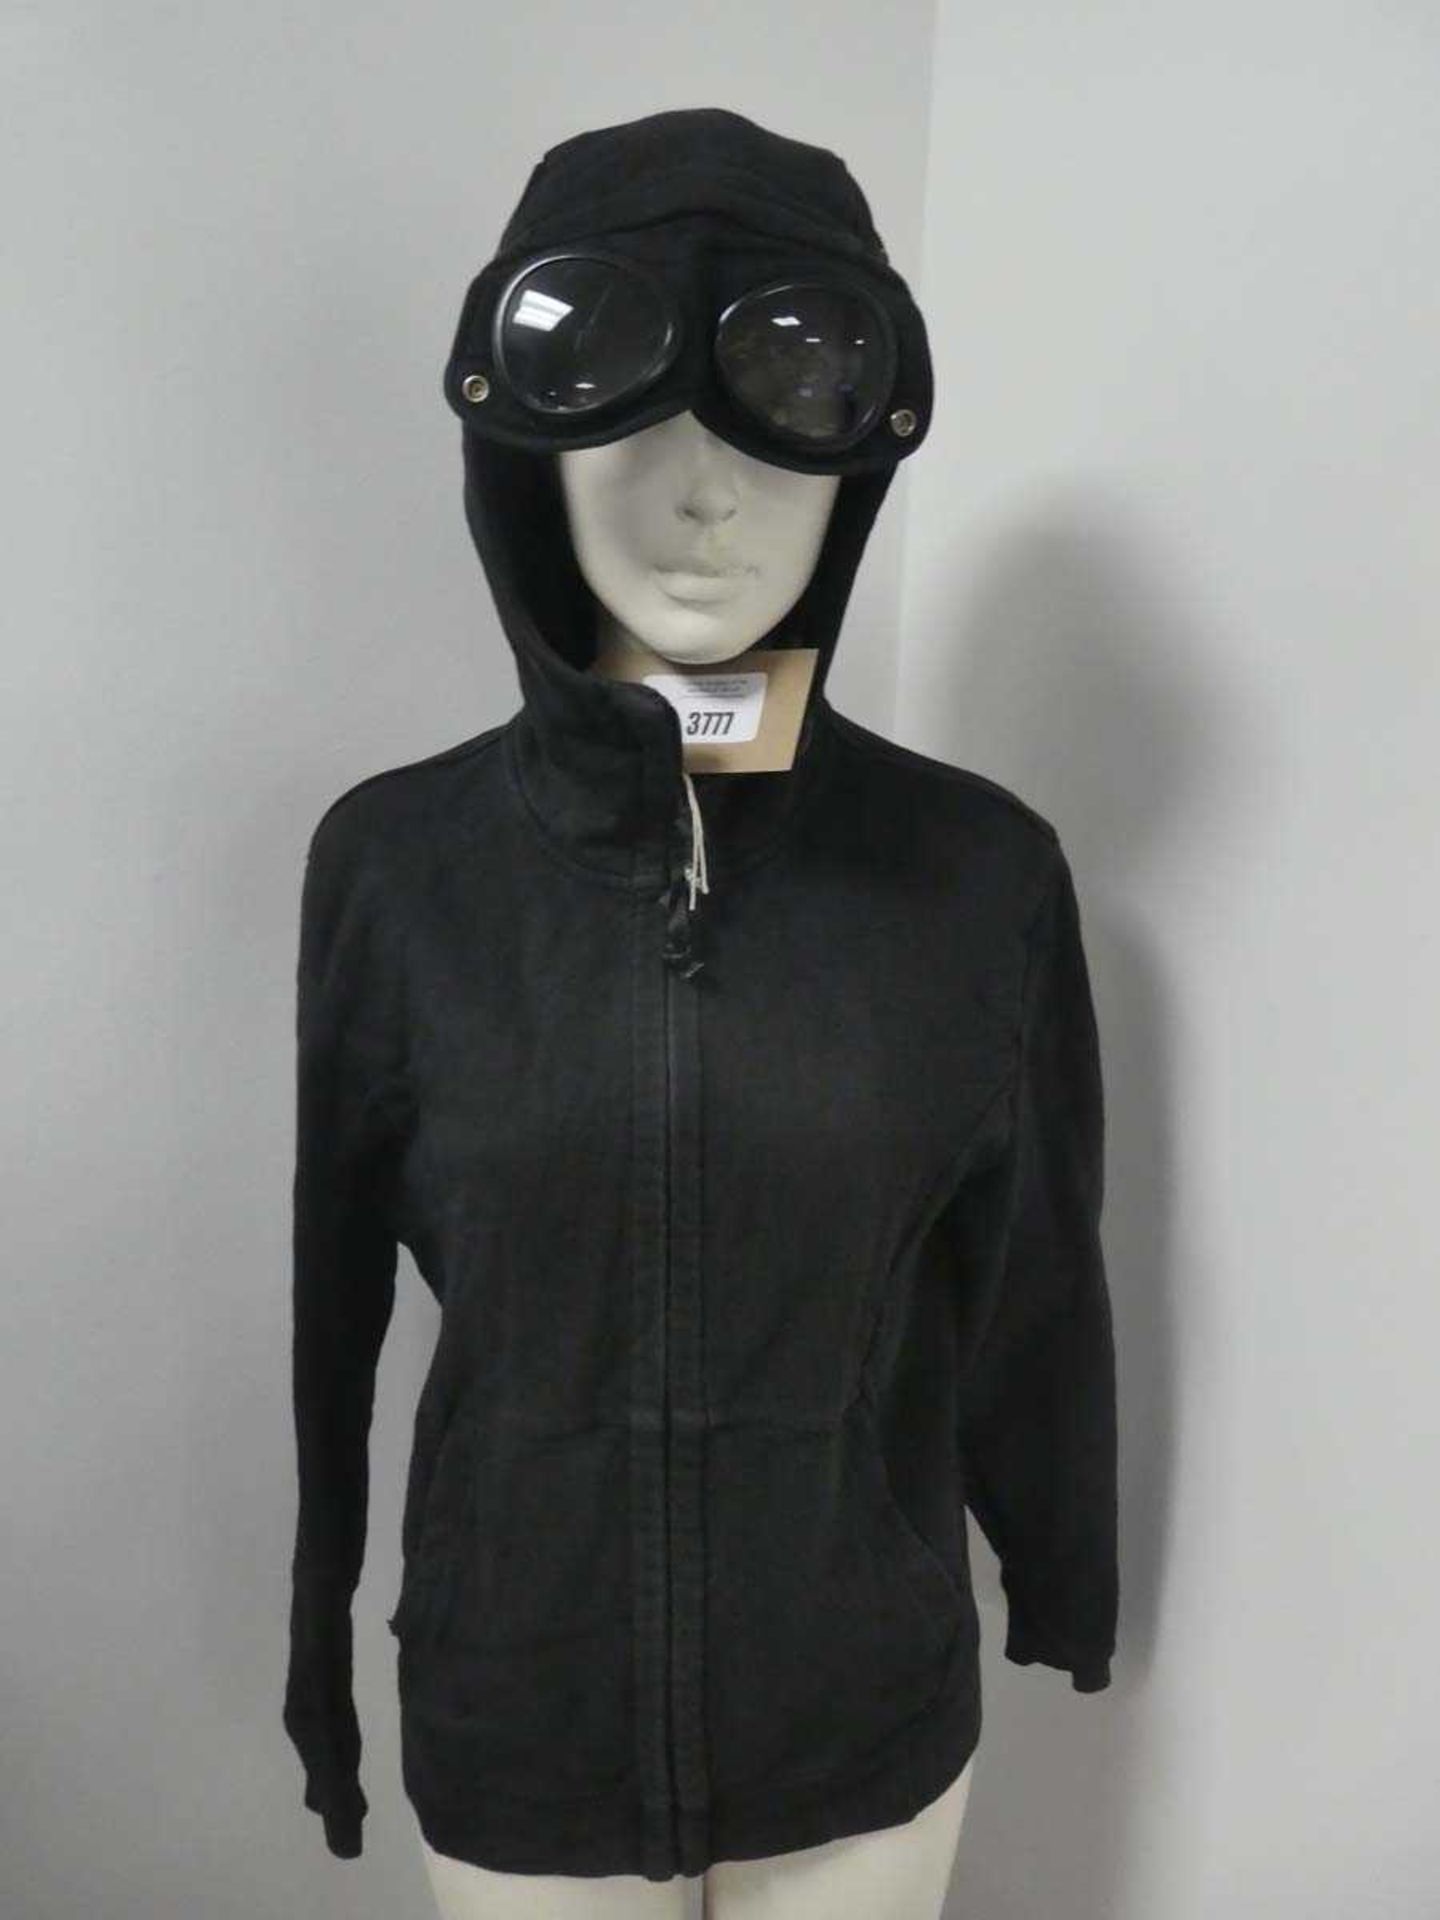 +VAT CP Company zipped hooded top in black, size small (hanging)